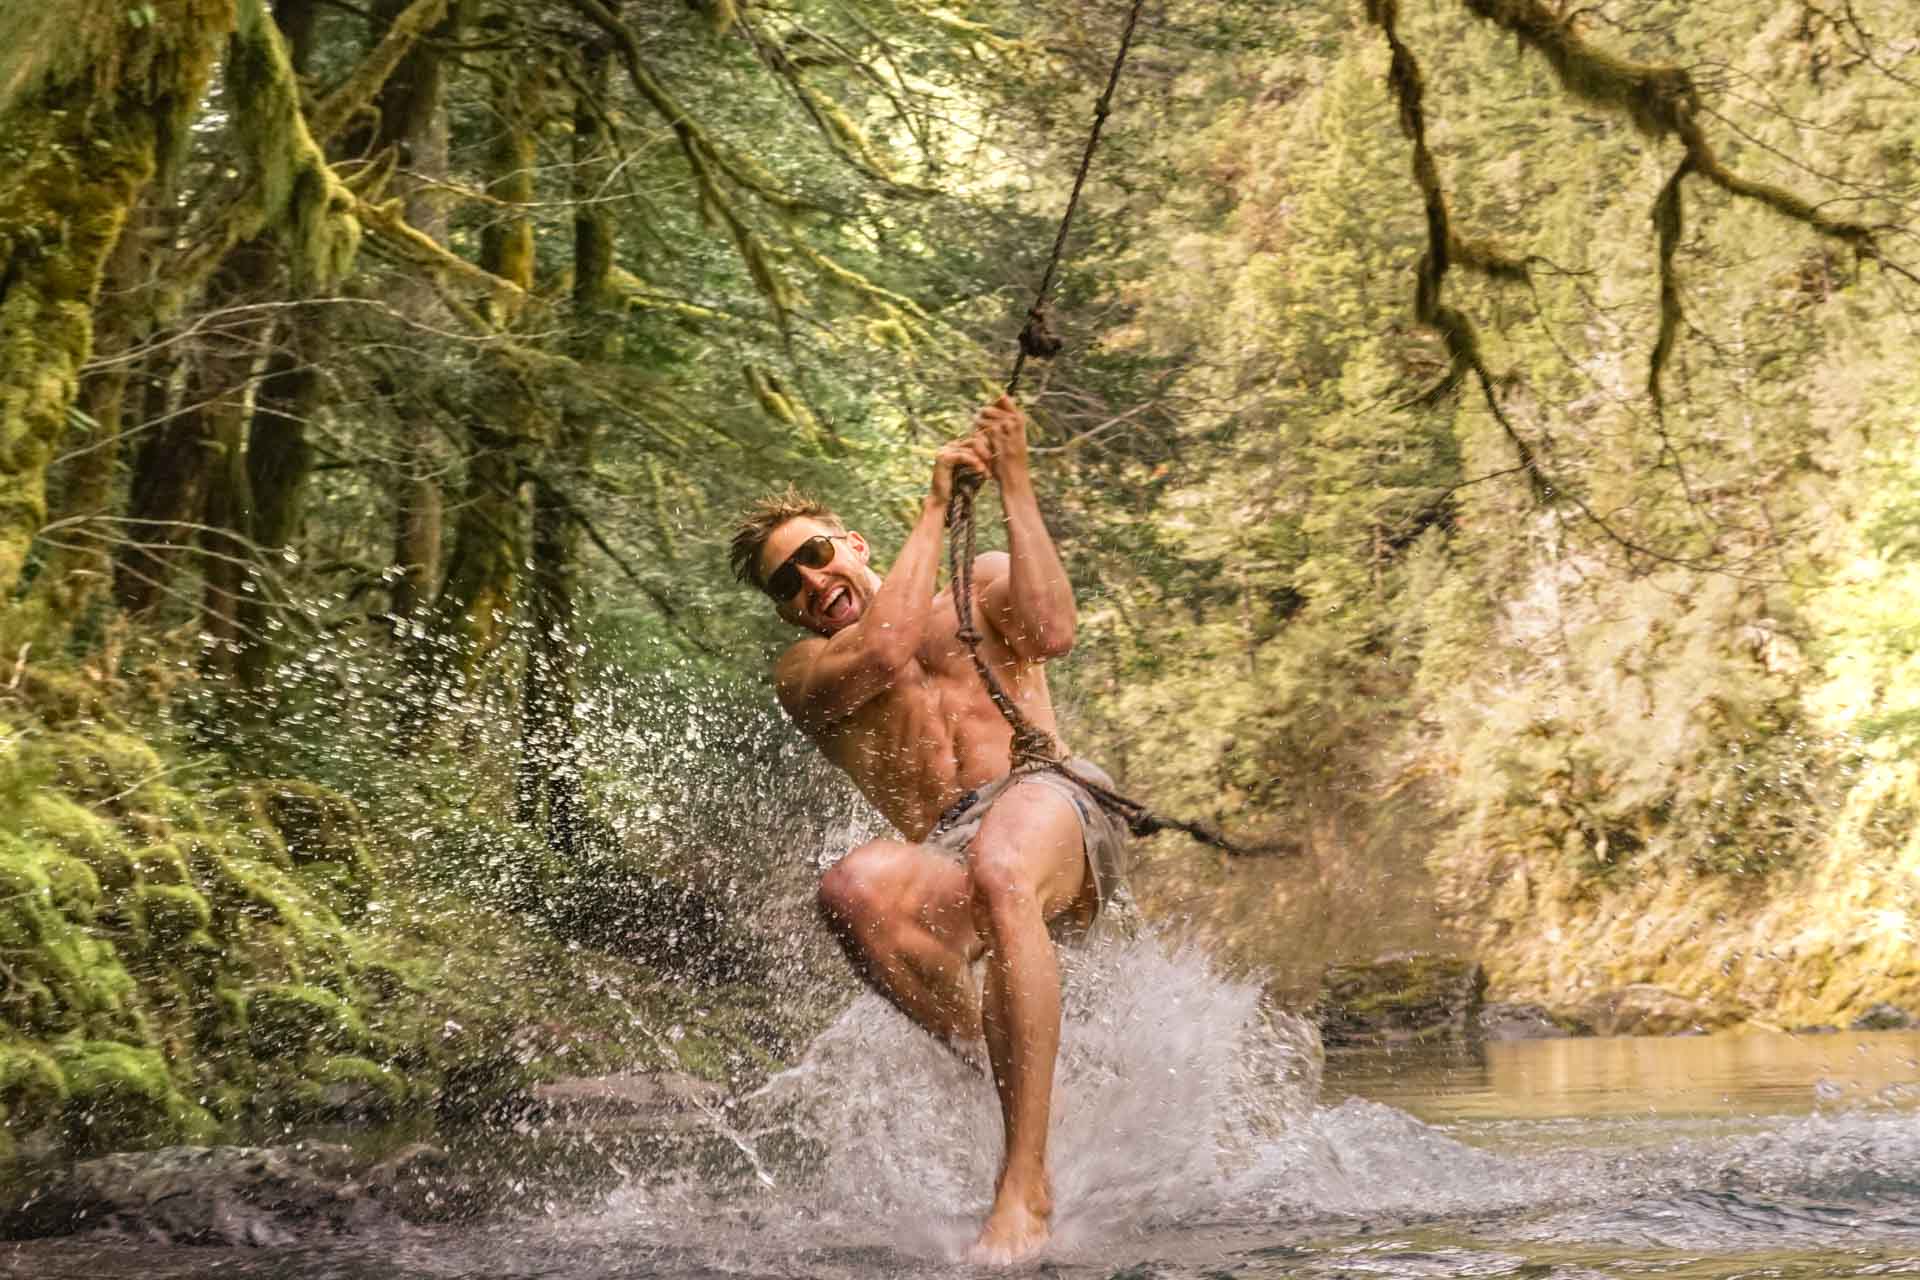 mattebrown_brown Man on a rope swing in a river smiling wearing Ombraz classic armless string sunglasses